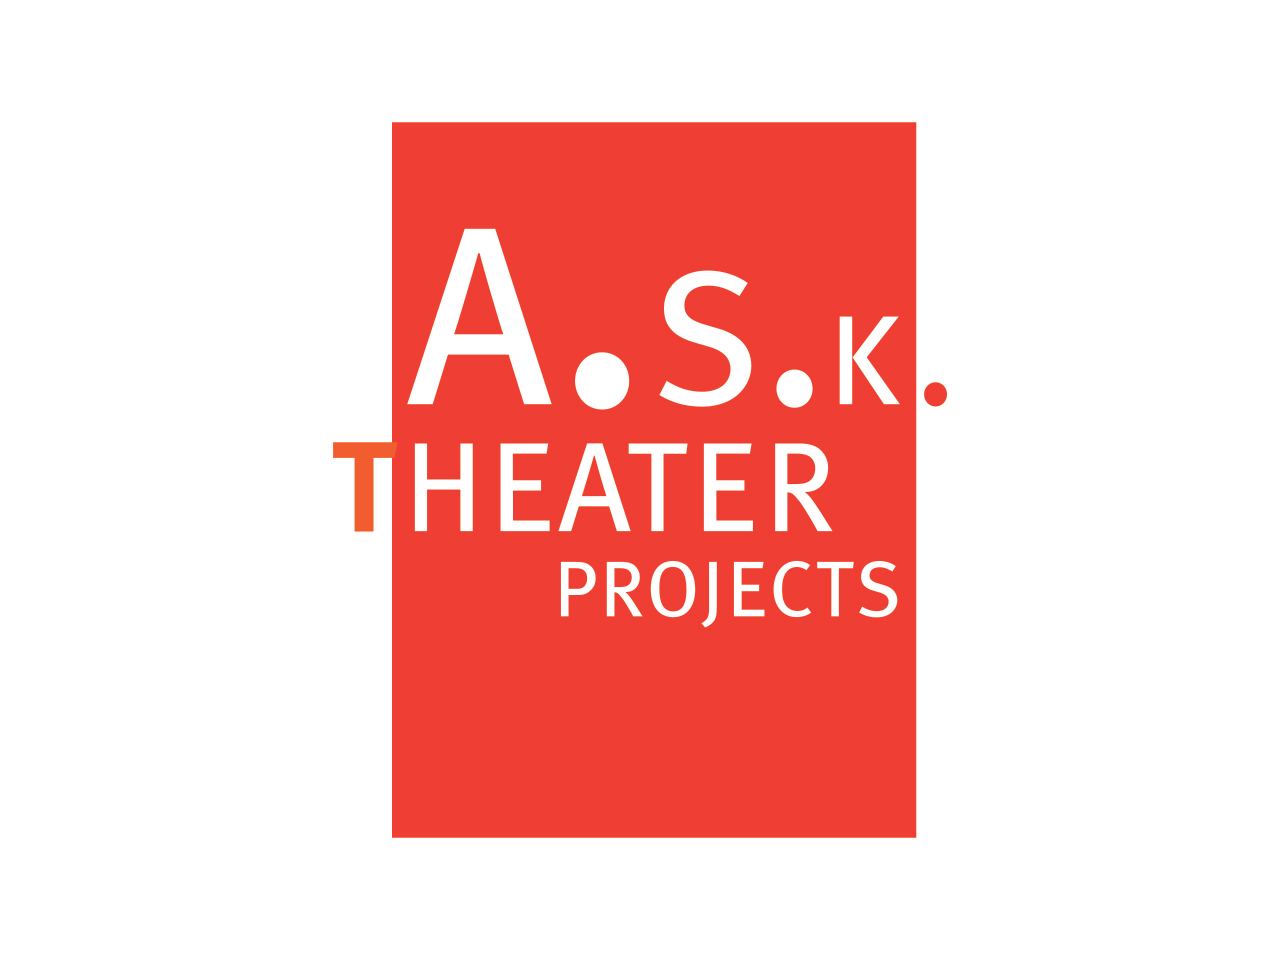 ARK Theater Projects